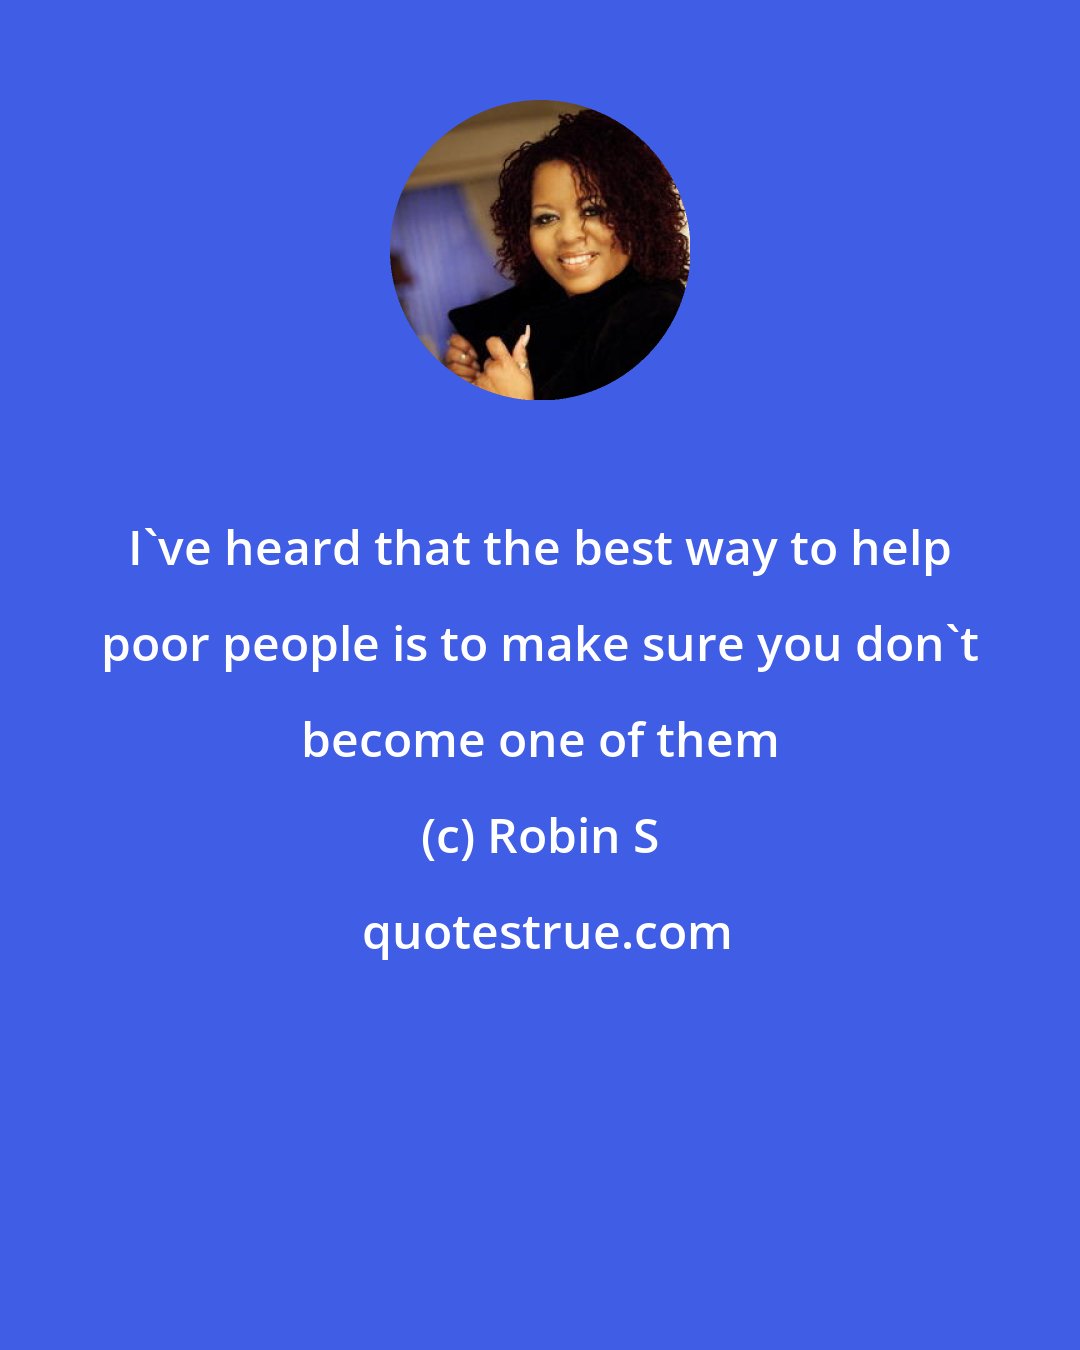 Robin S: I've heard that the best way to help poor people is to make sure you don't become one of them